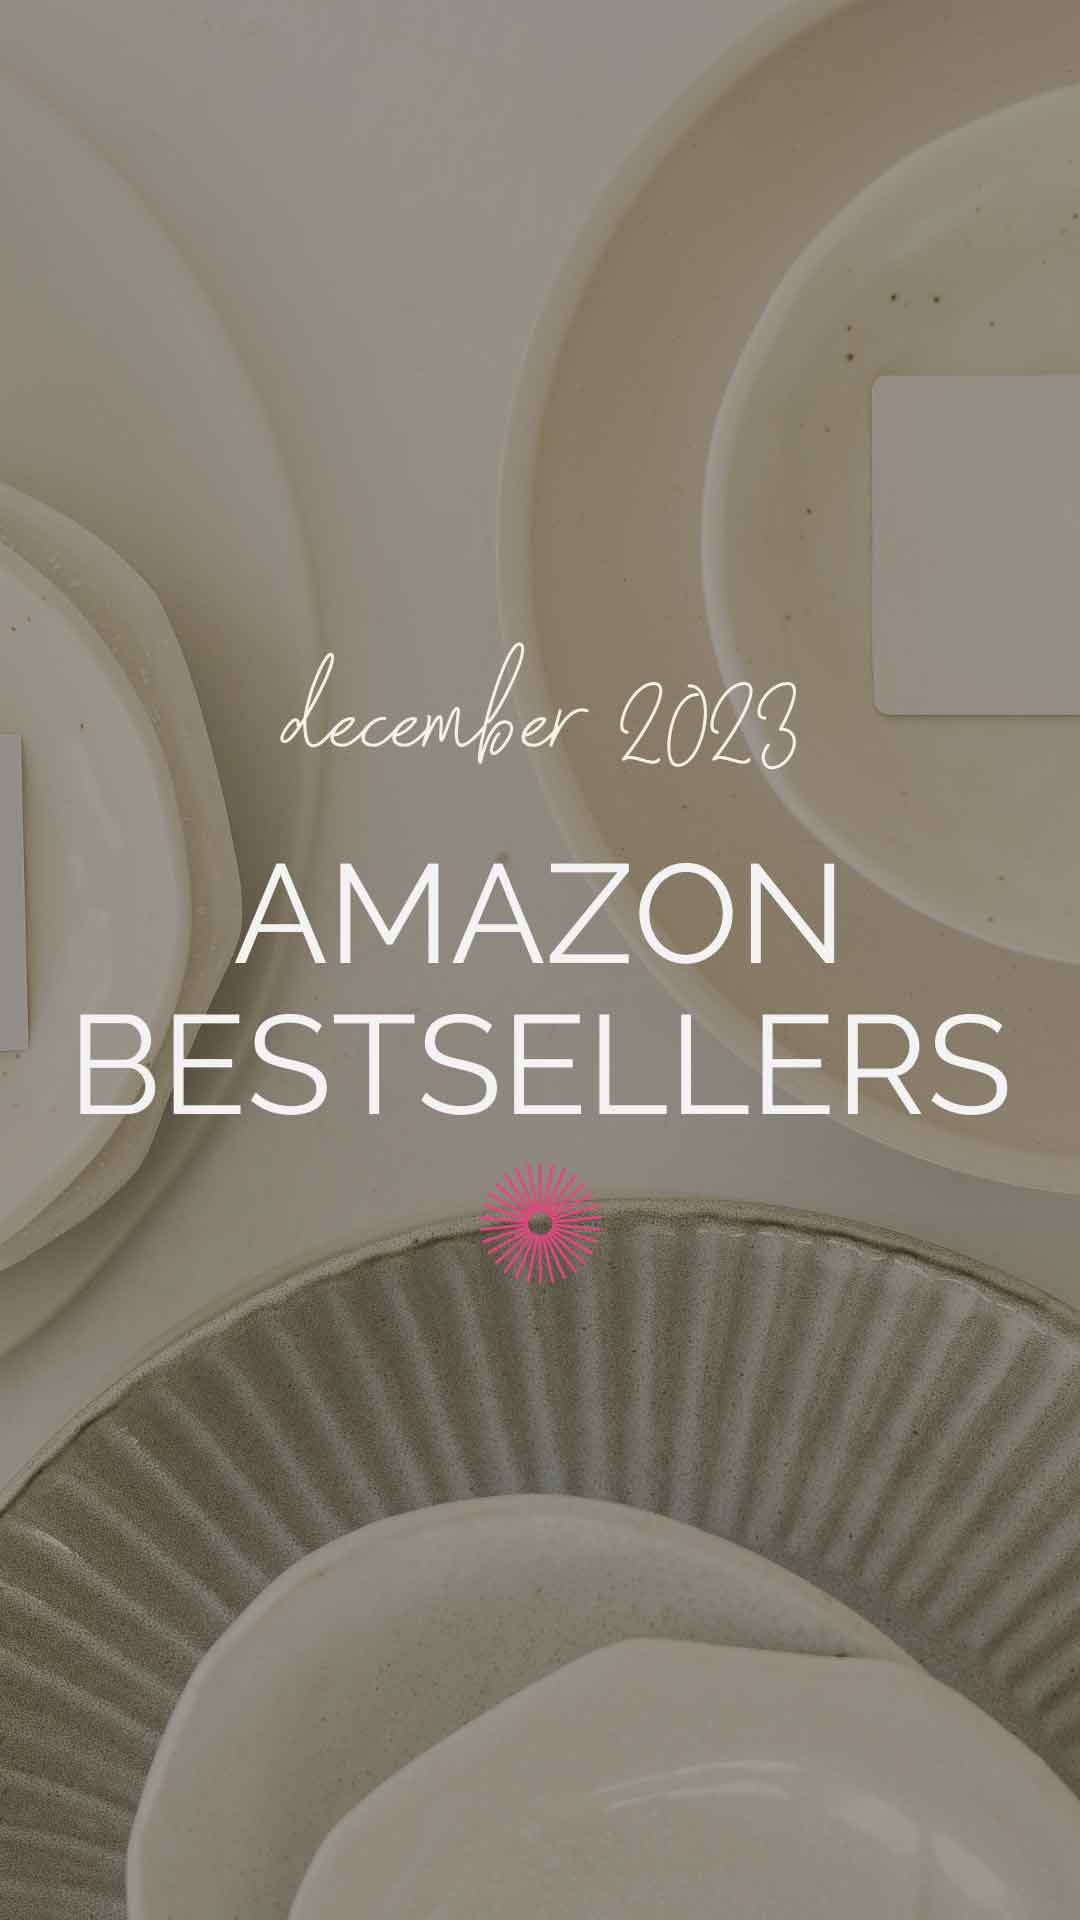 Beige plates in the background with text overlay reading "December 2023 Amazon Bestsellers".